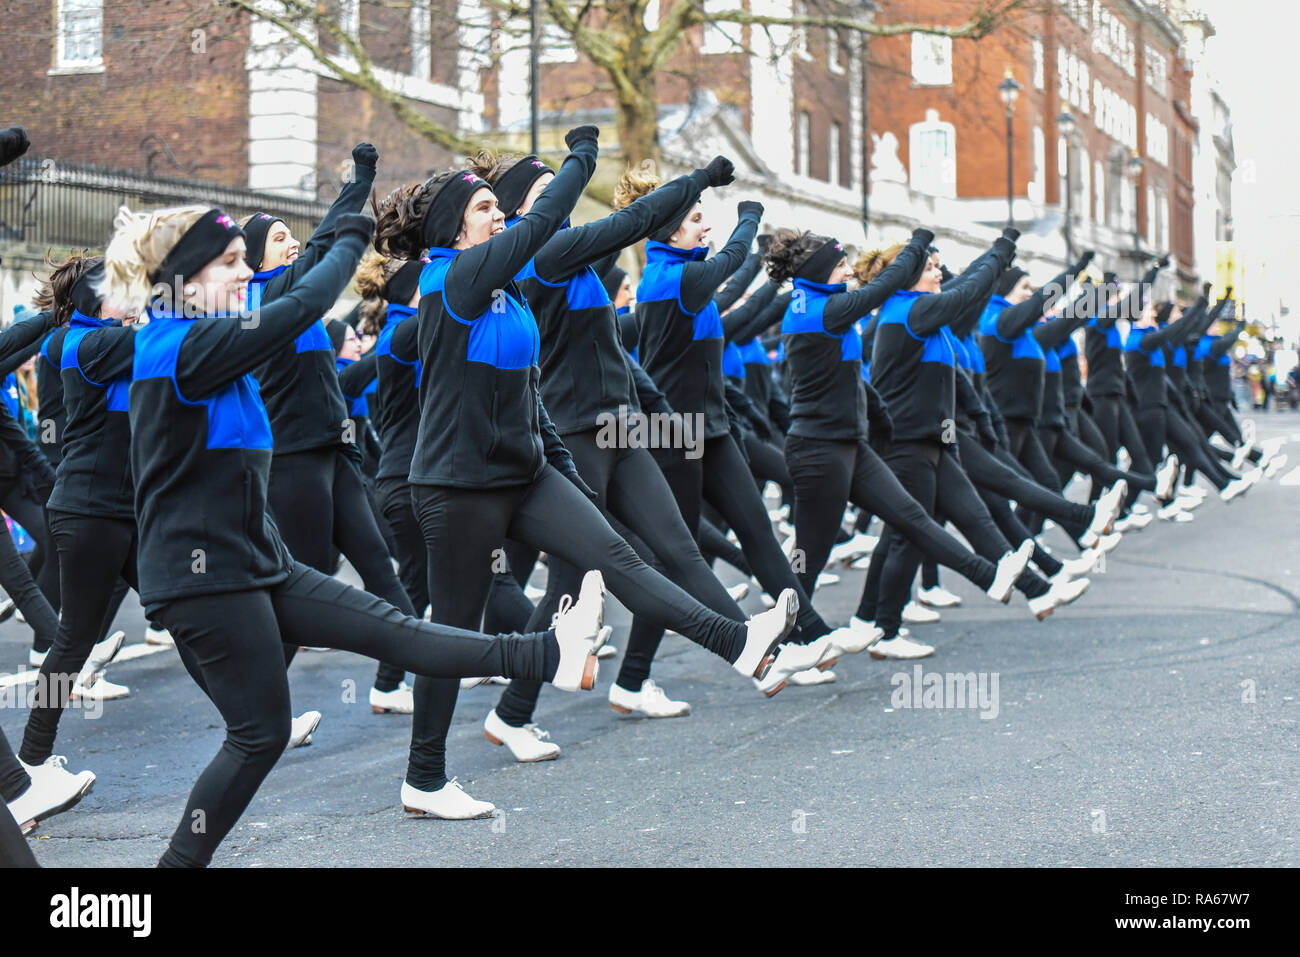 America's Clogging All Stars at London's New Year's Day Parade, UK Stock Photo